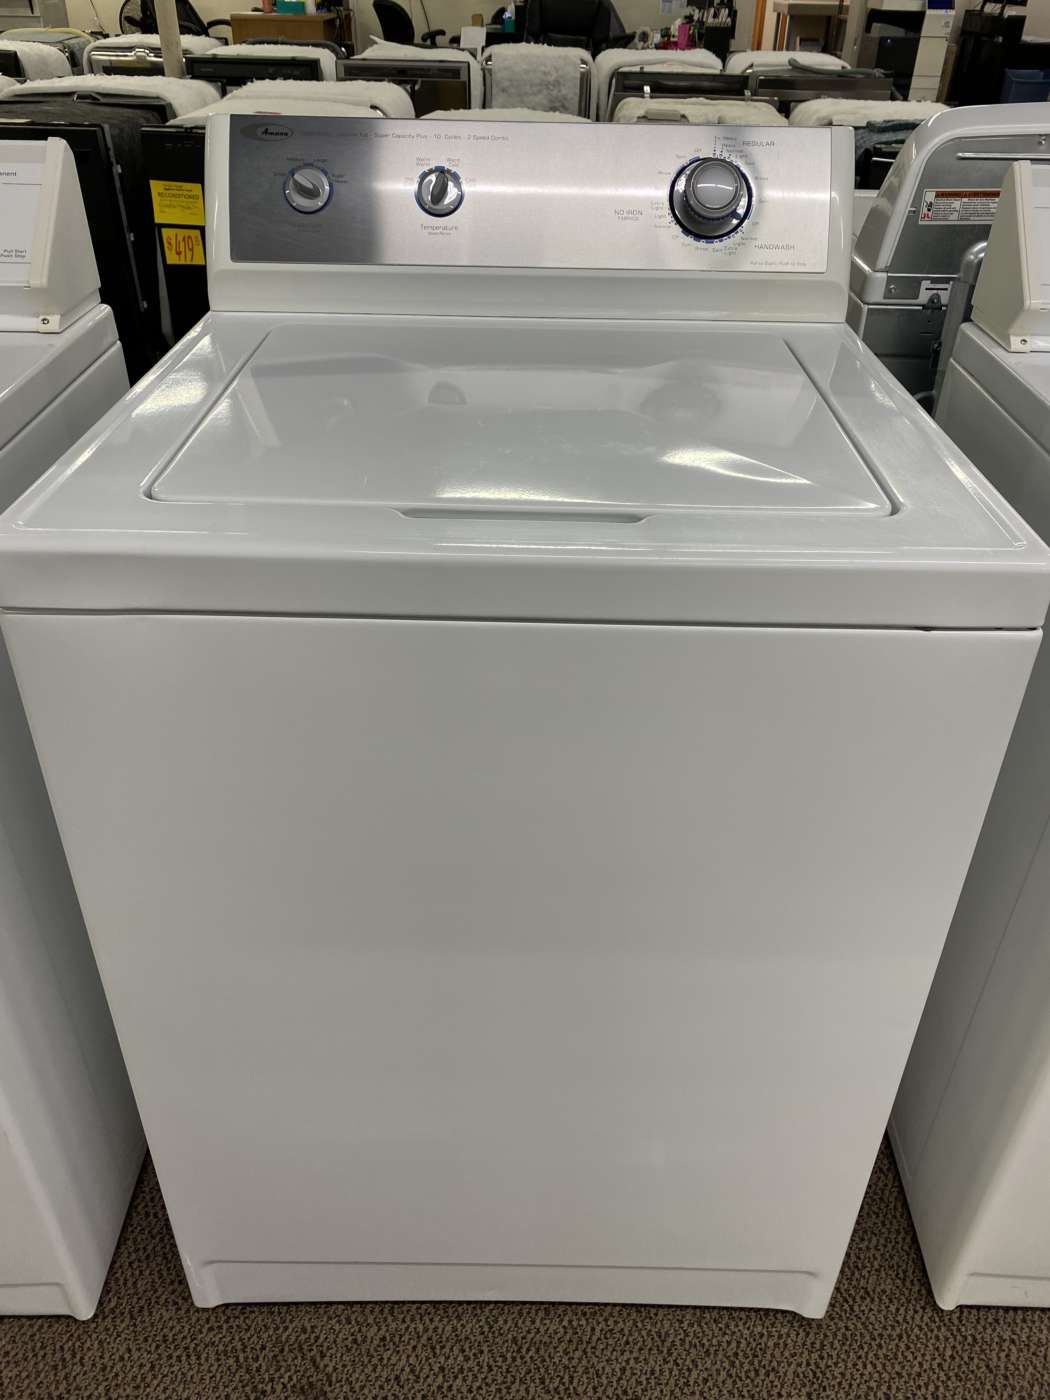 Reconditioned AMANA 3.3 Cu. Ft. Top-Load Washer – White